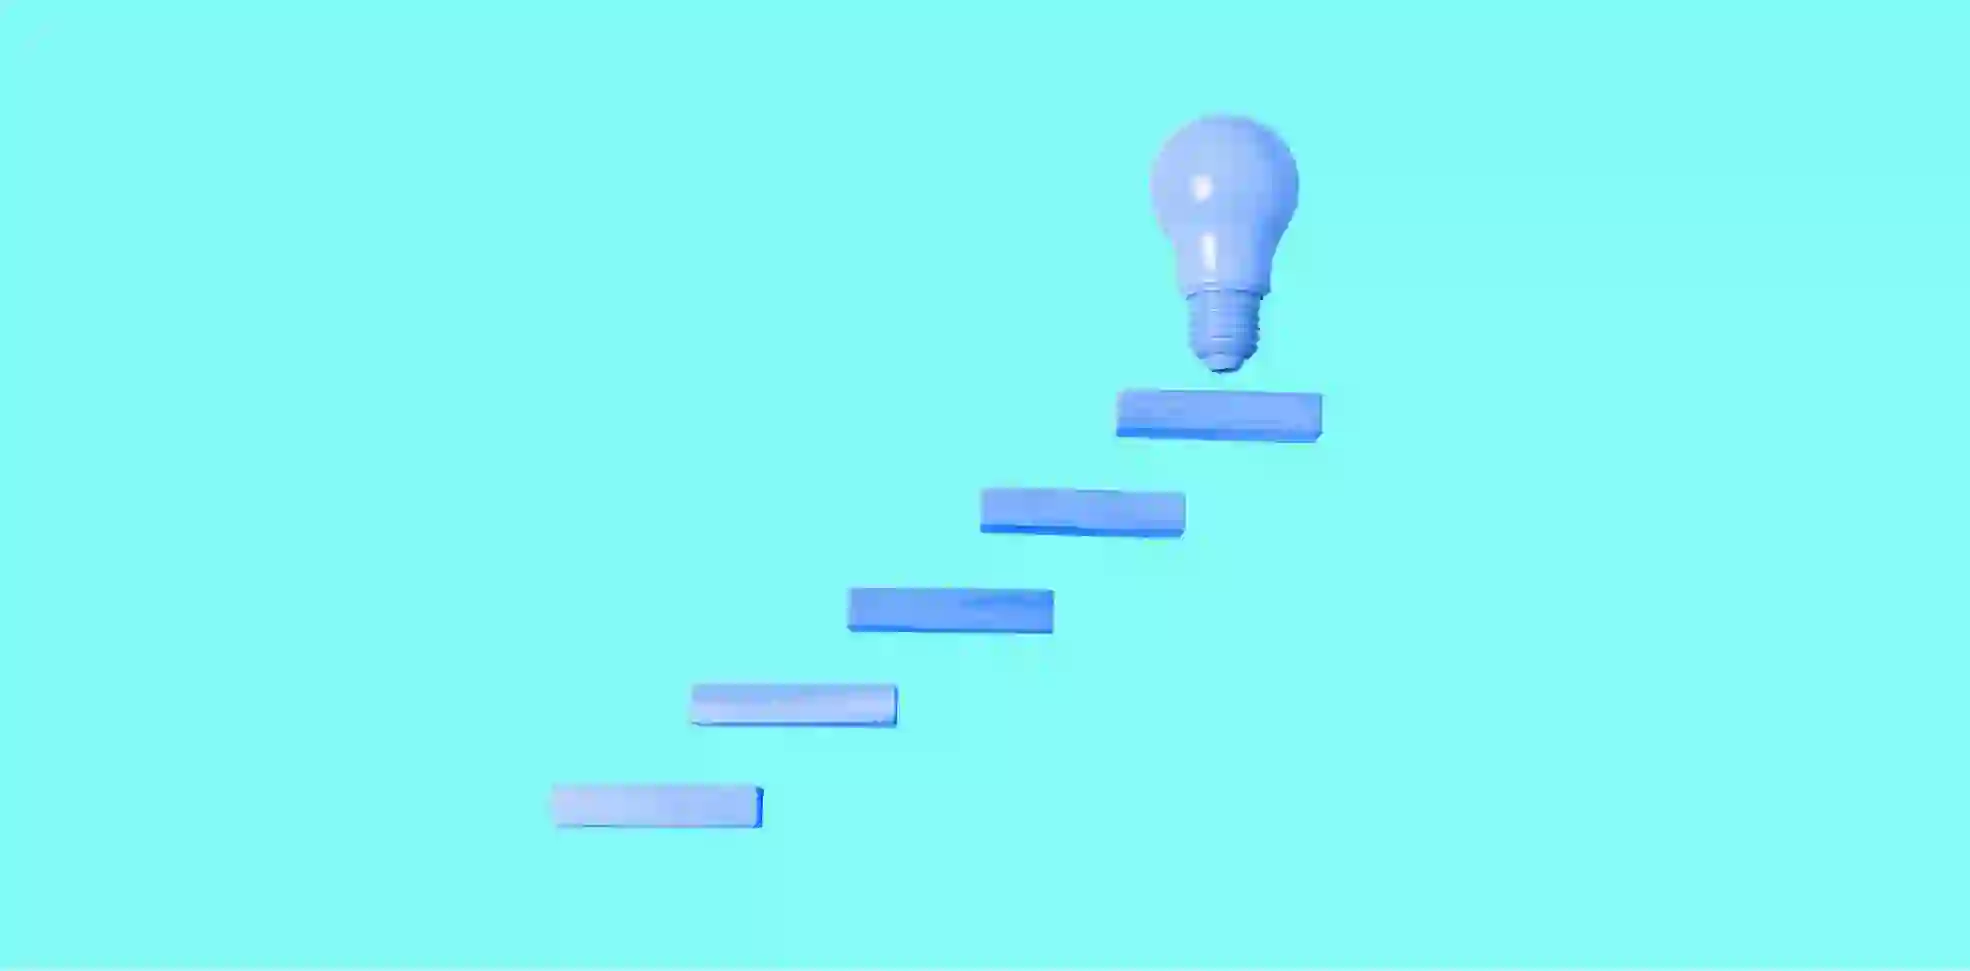 light bulb at the top of the stairs on blue background